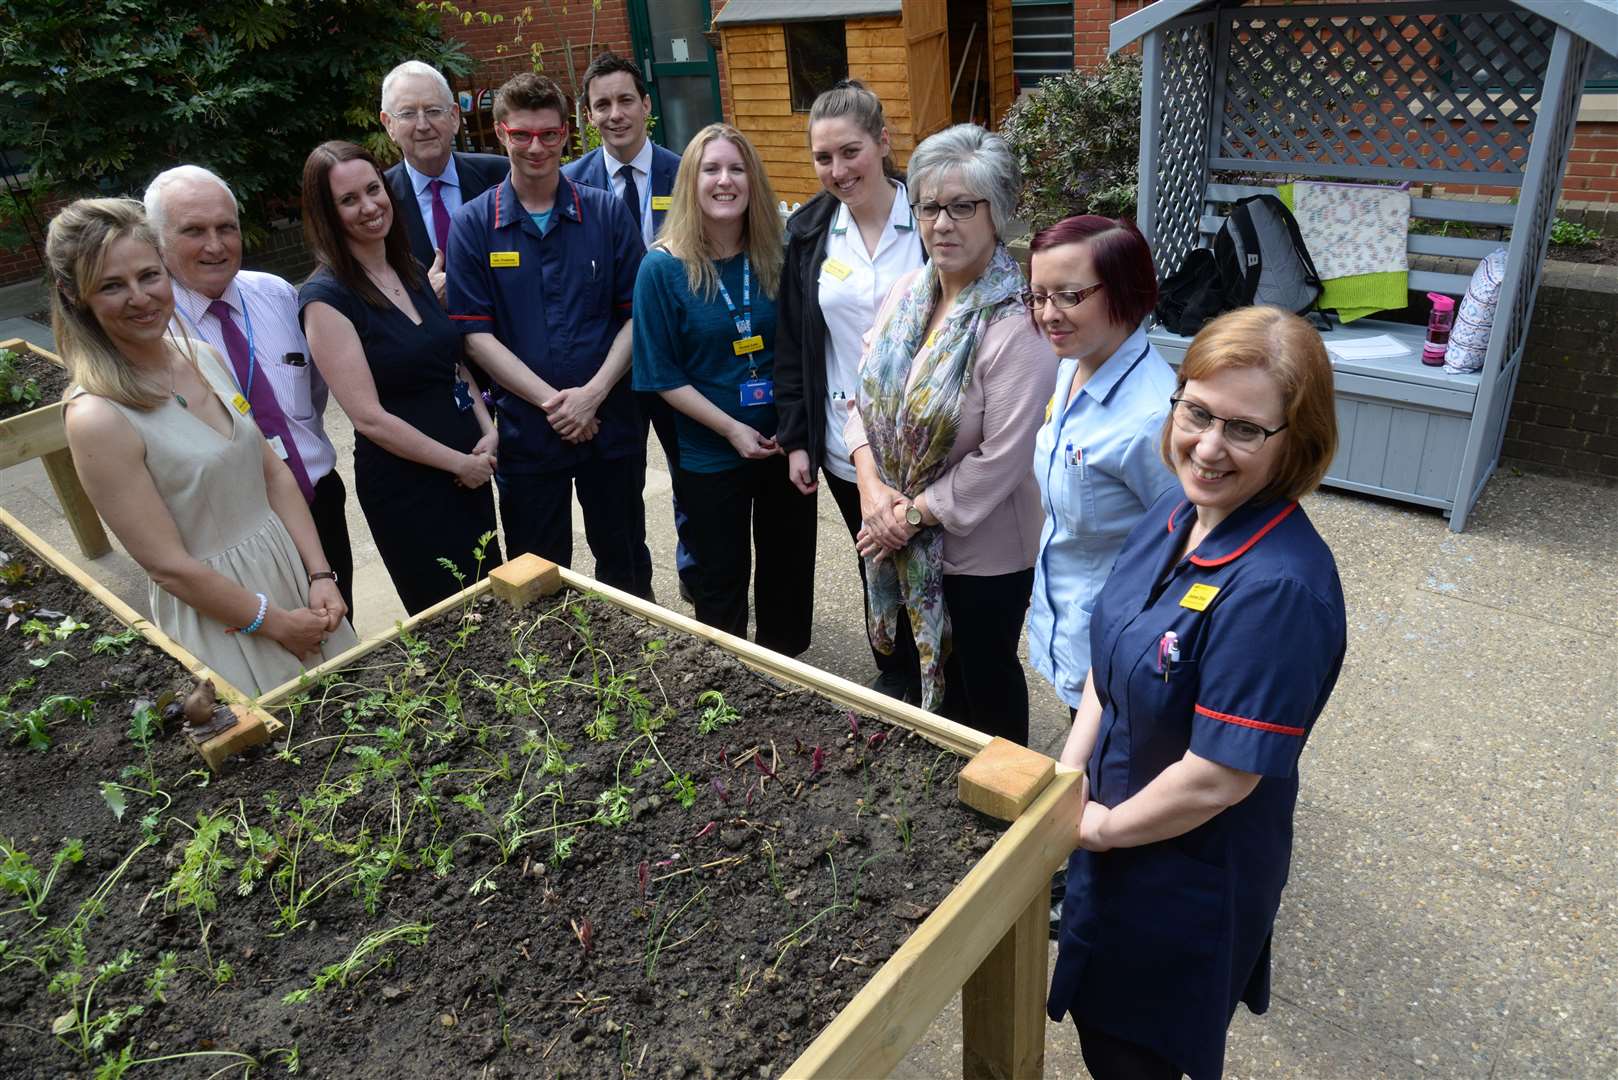 The working group at the opening of the dementia garden at the Medway Maritime Hospital on Wednesday. Picture: Chris Davey. (9488568)